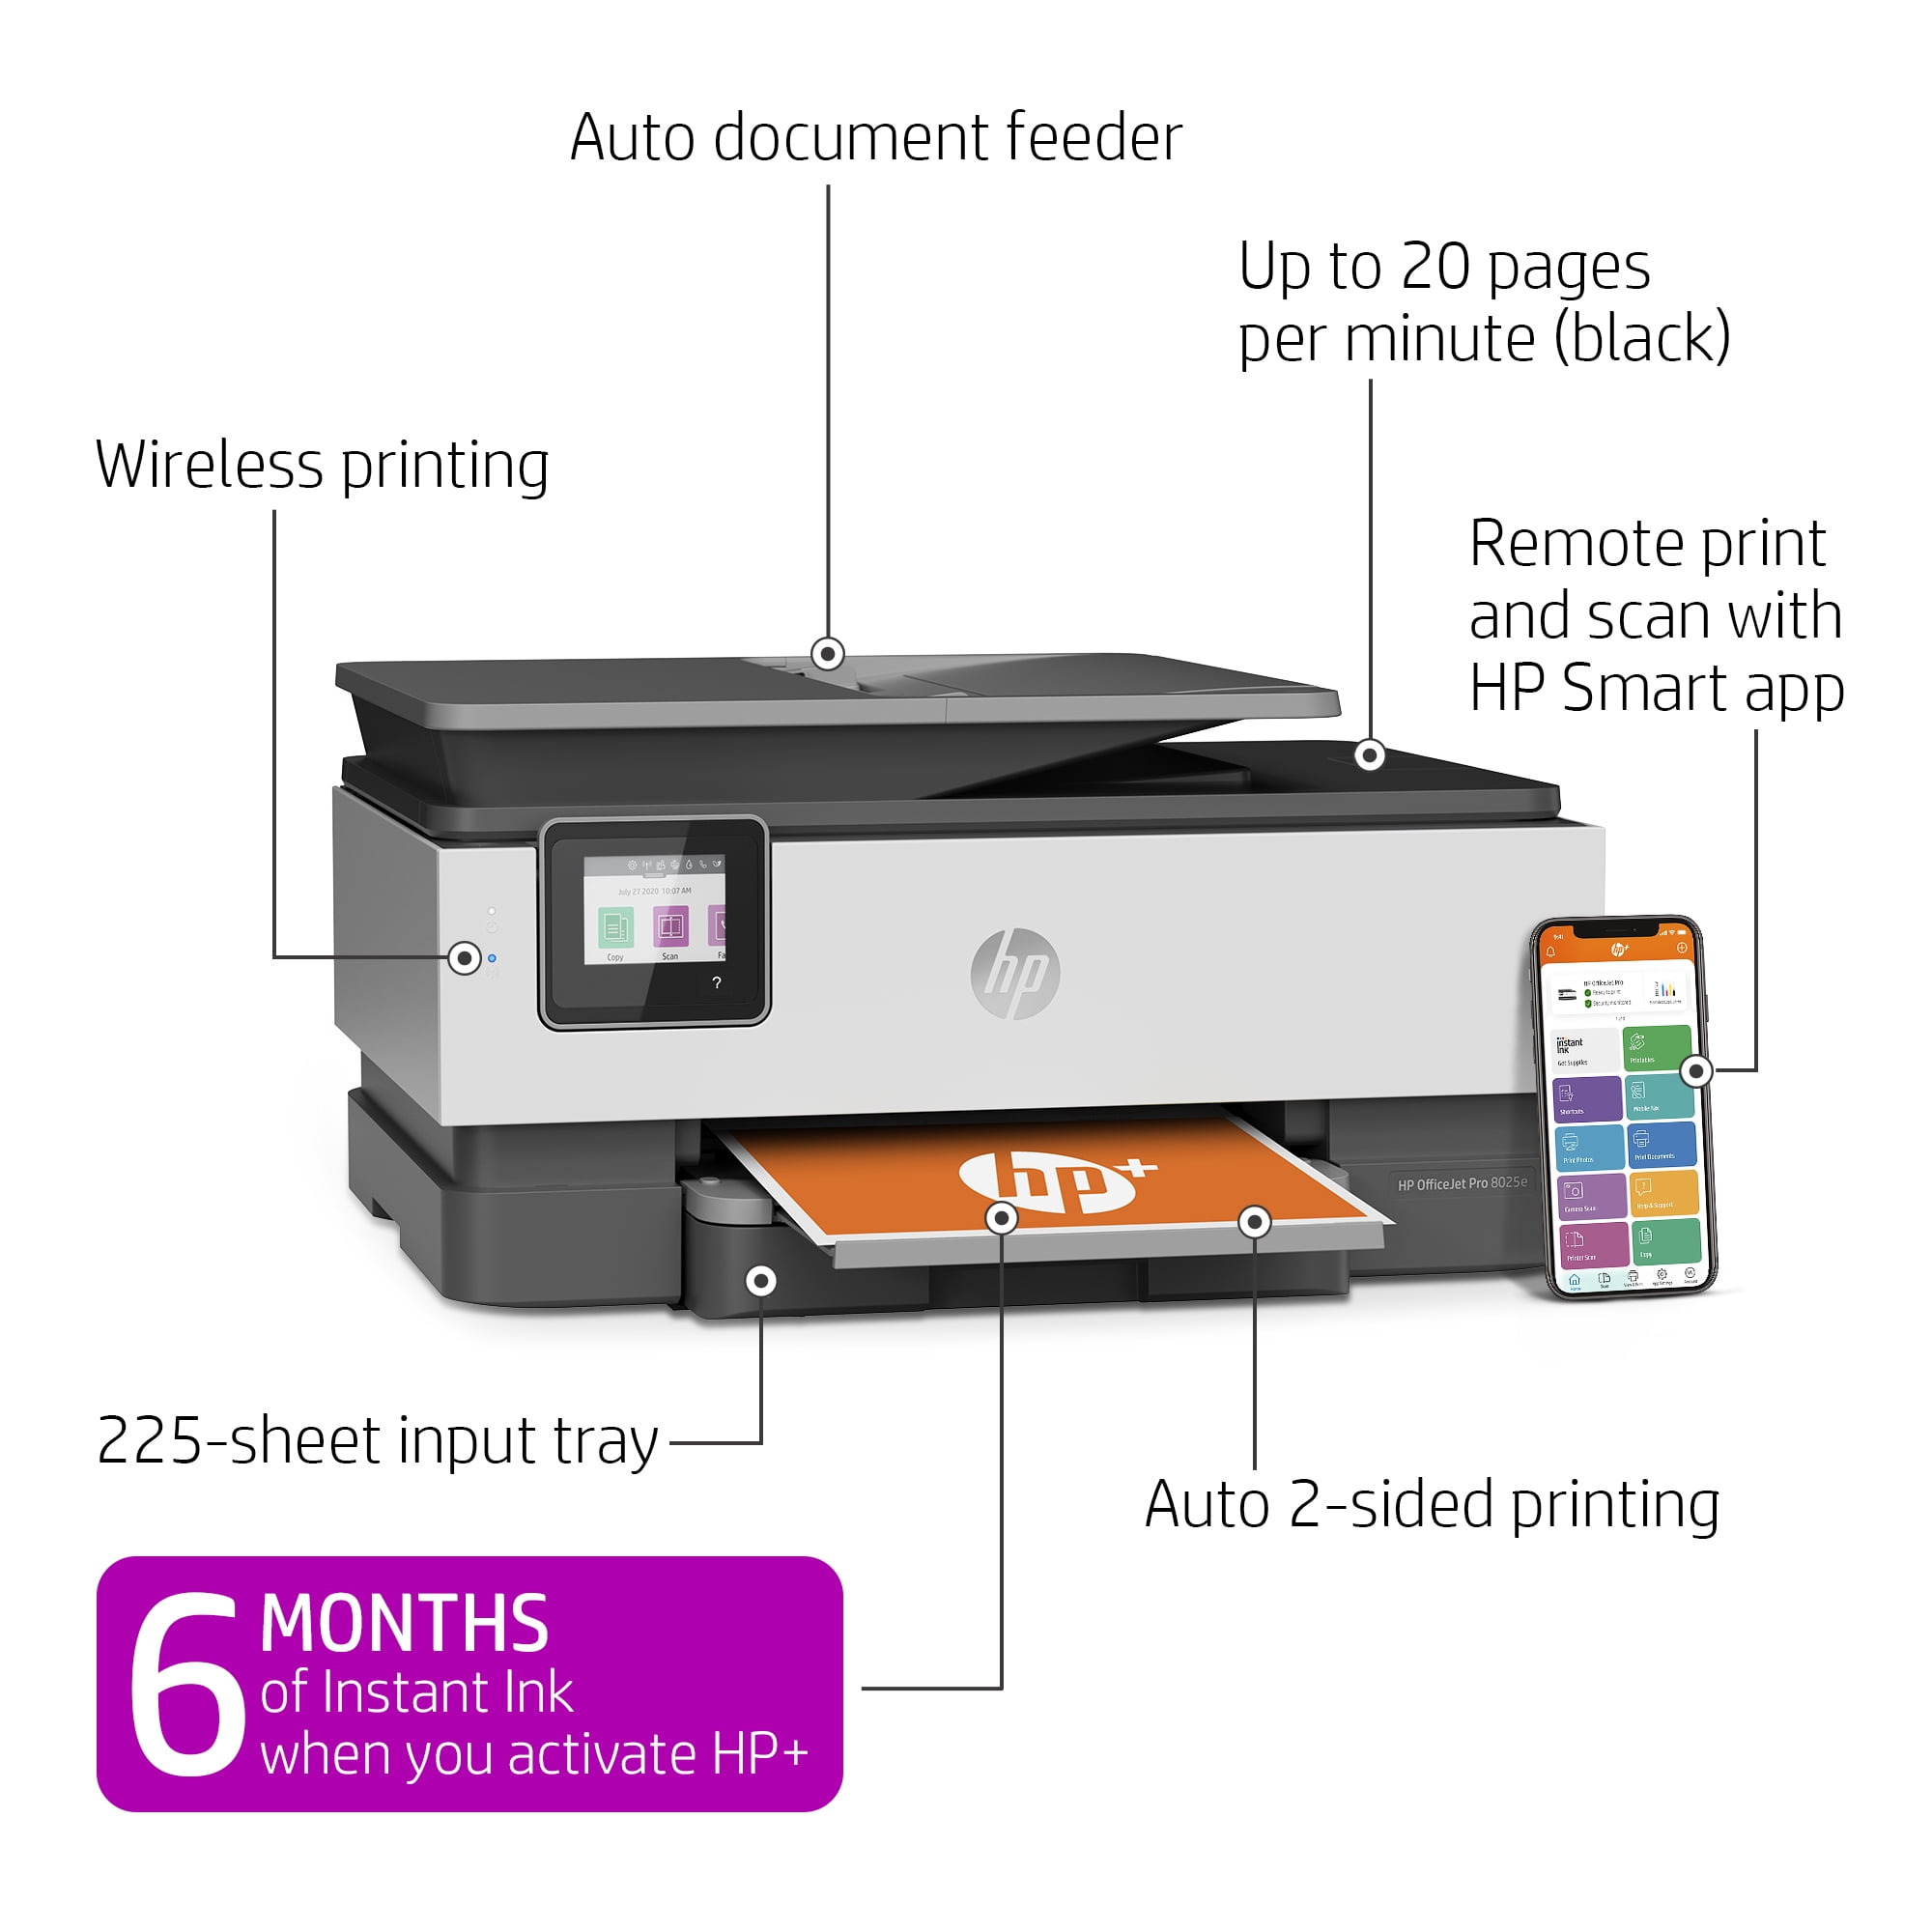 HP OfficeJet 8025e All-in-One Wireless Color Inkjet Printer - 6 months free with HP+ - Walmart.com